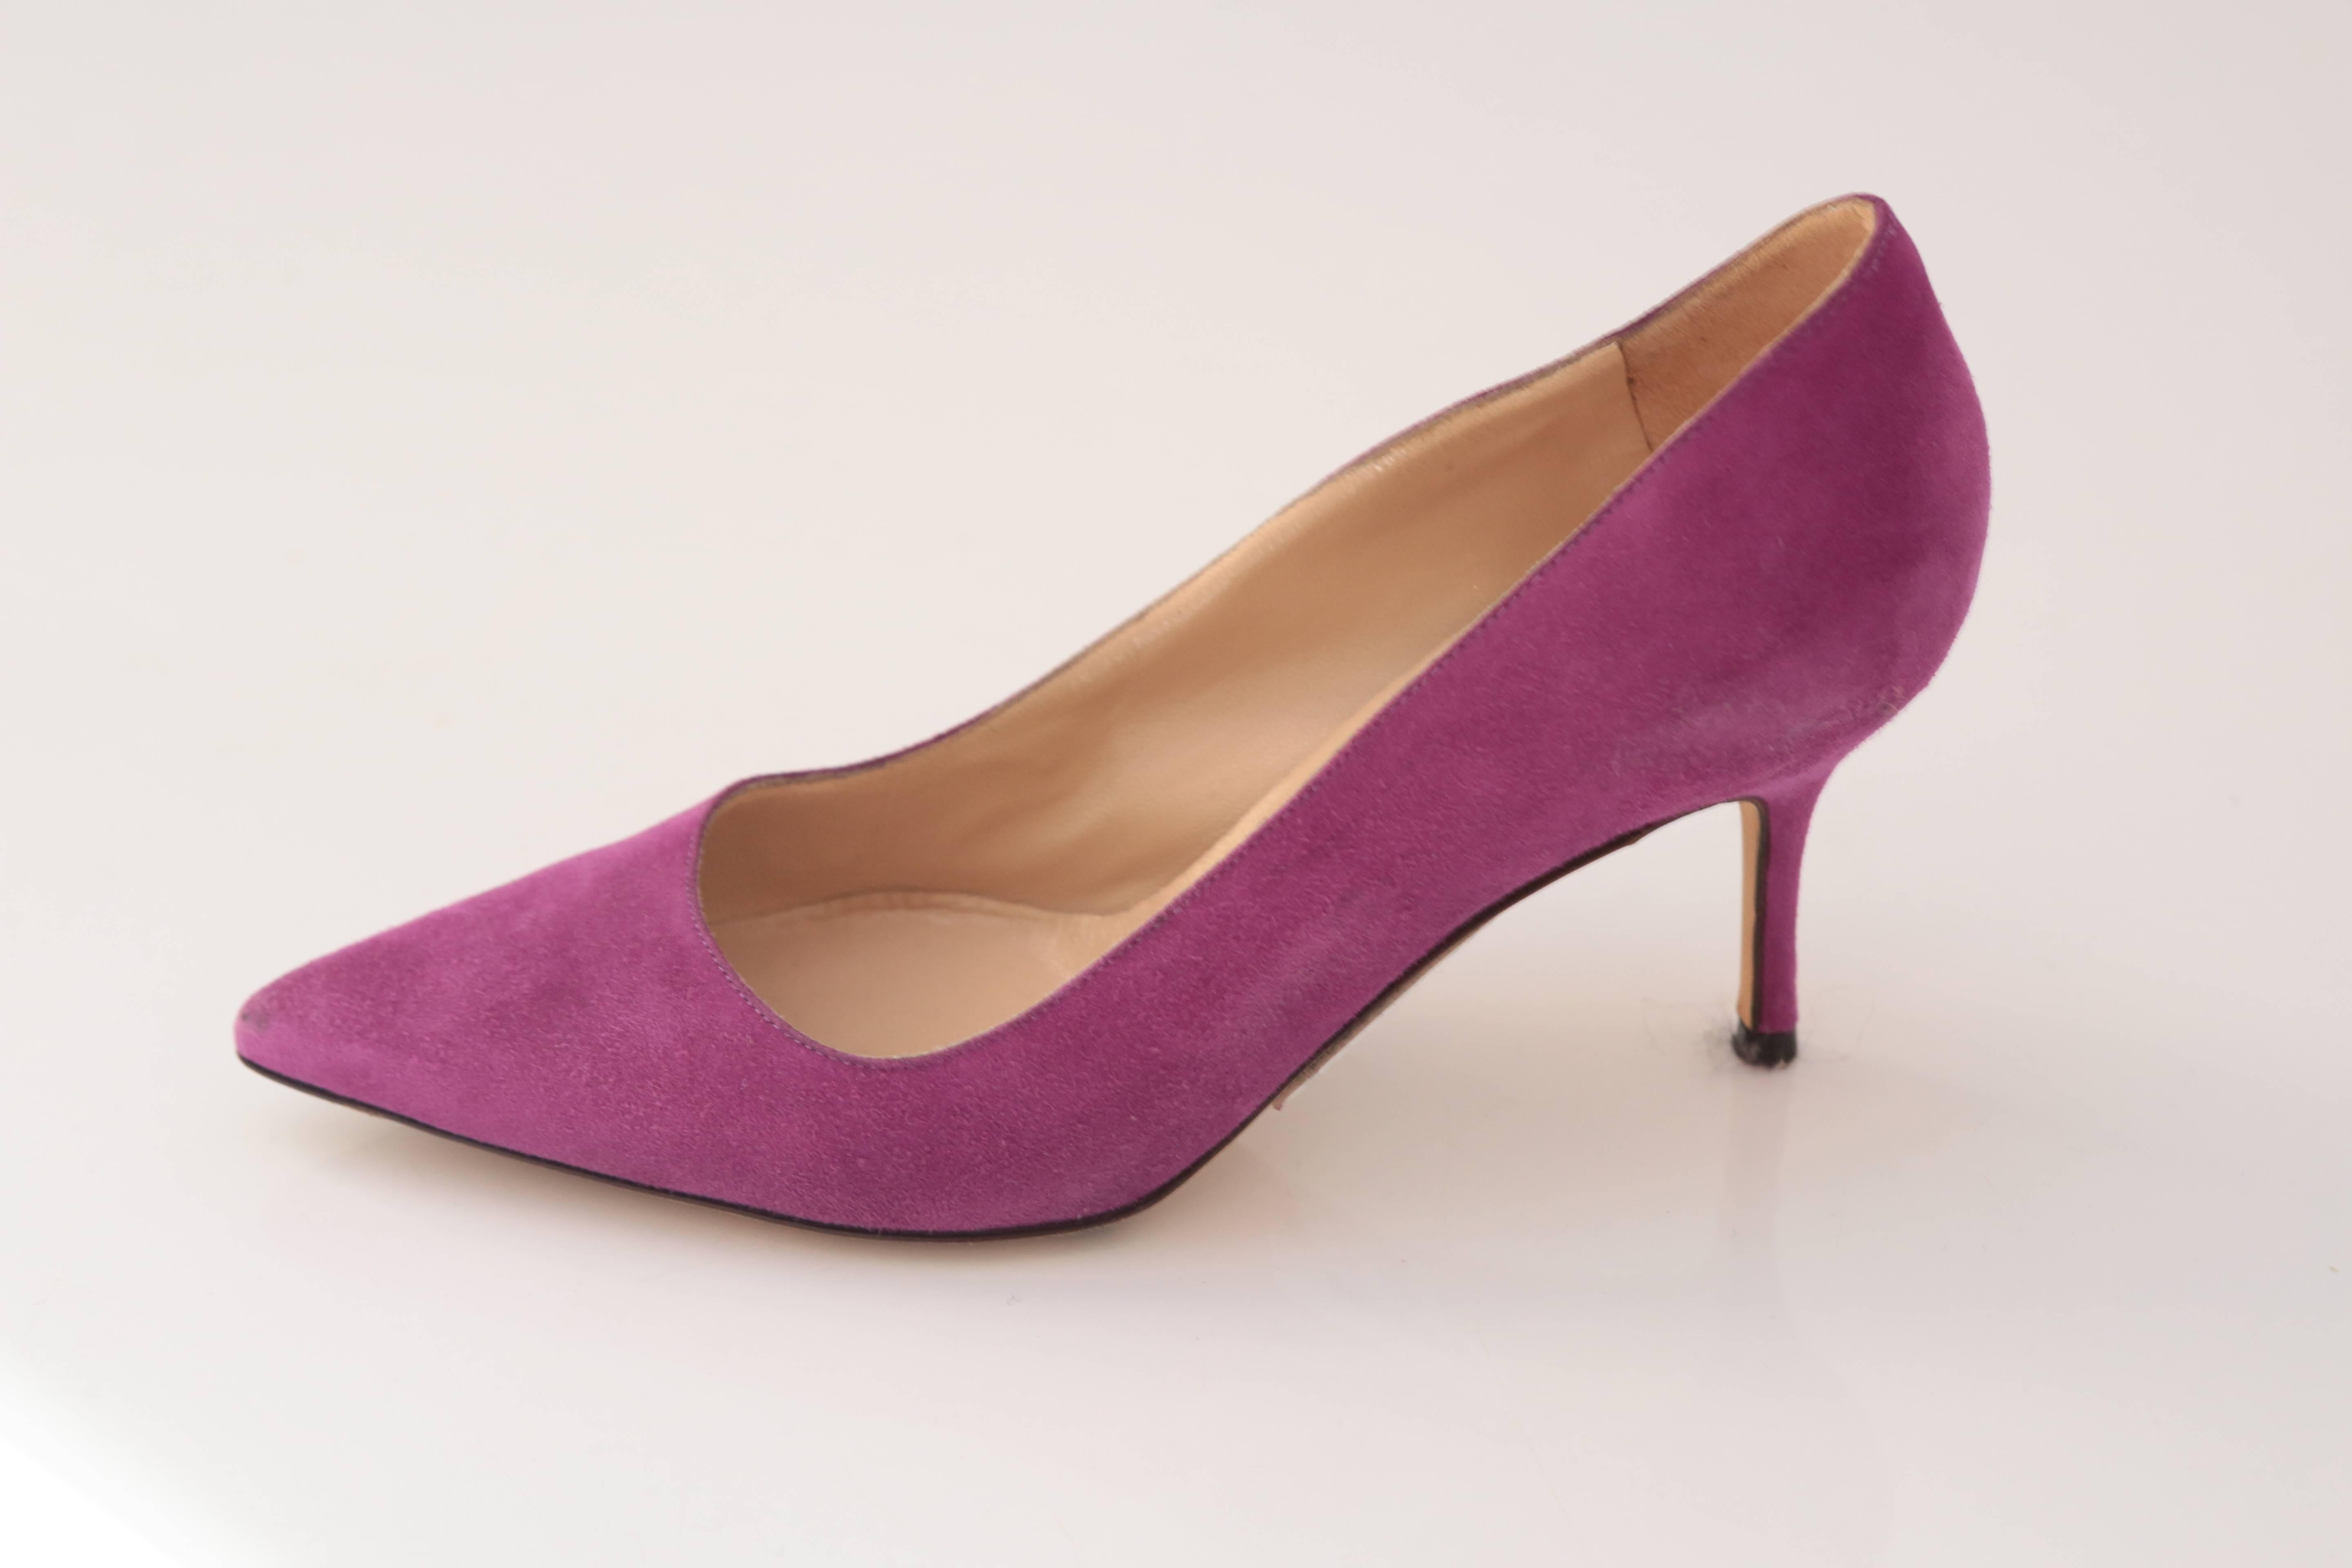 A staple Manolo Blahnik pump in Magenta Suede is a fun addition to any shoe lover's closet!